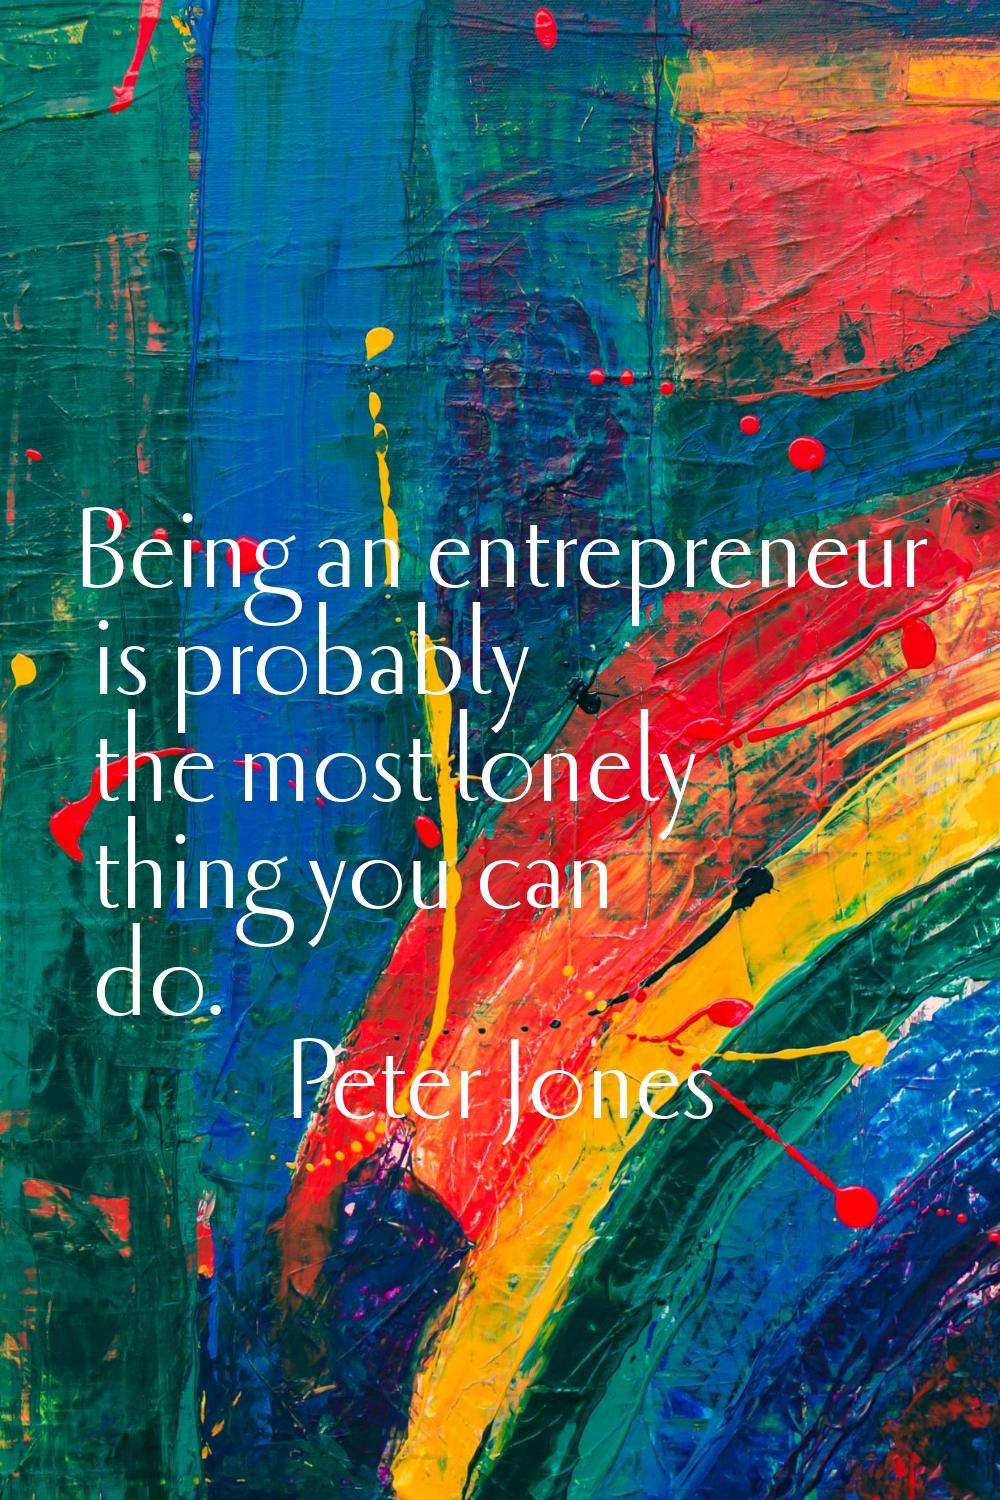 Being an entrepreneur is probably the most lonely thing you can do.